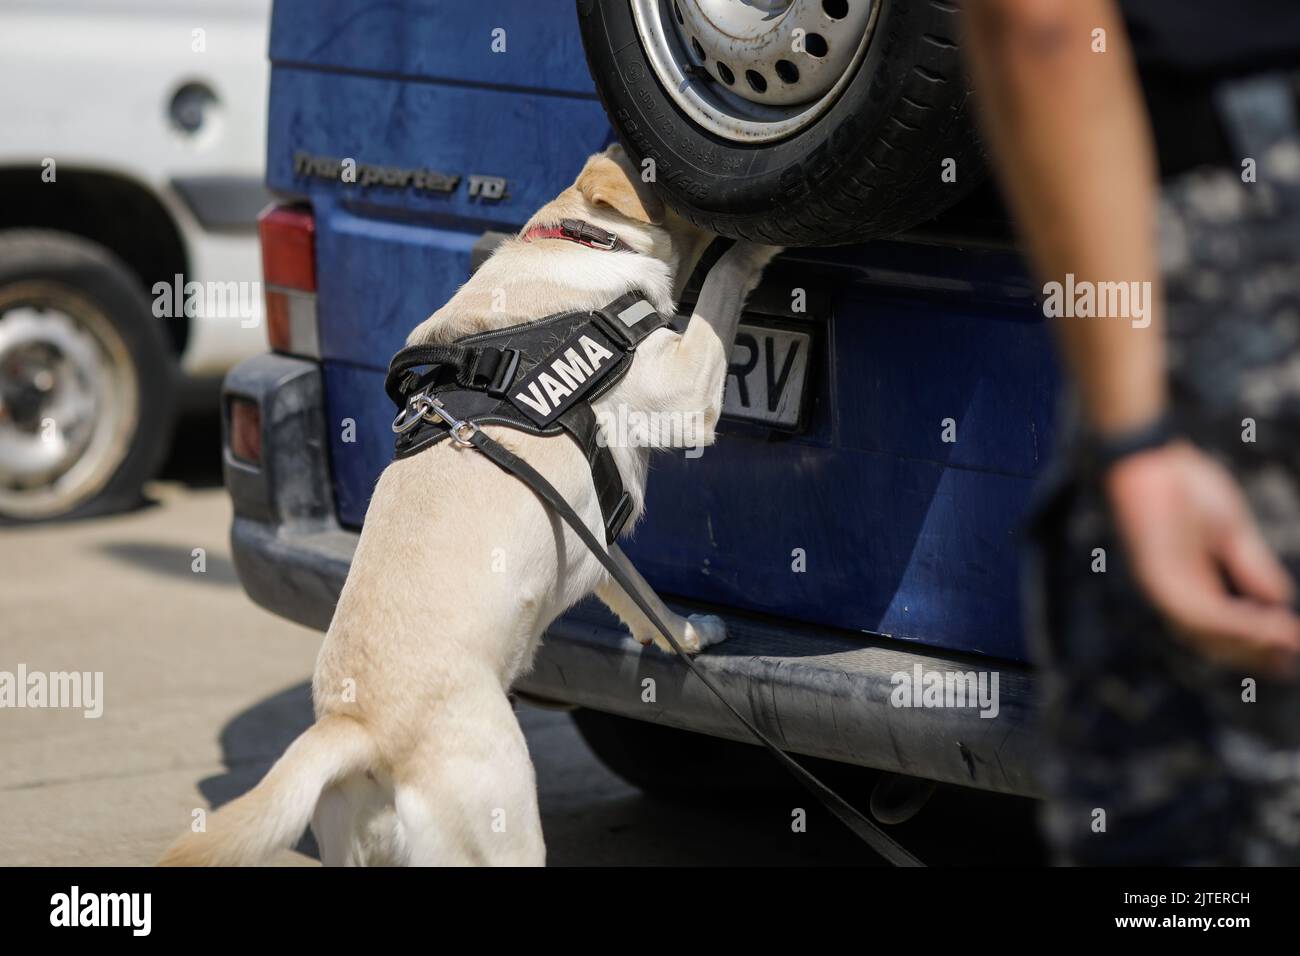 Bucharest, Romania - August 30, 2022: Officer from the Romanian customs train a service dog to detect drugs and ammunition near a car during a drill e Stock Photo